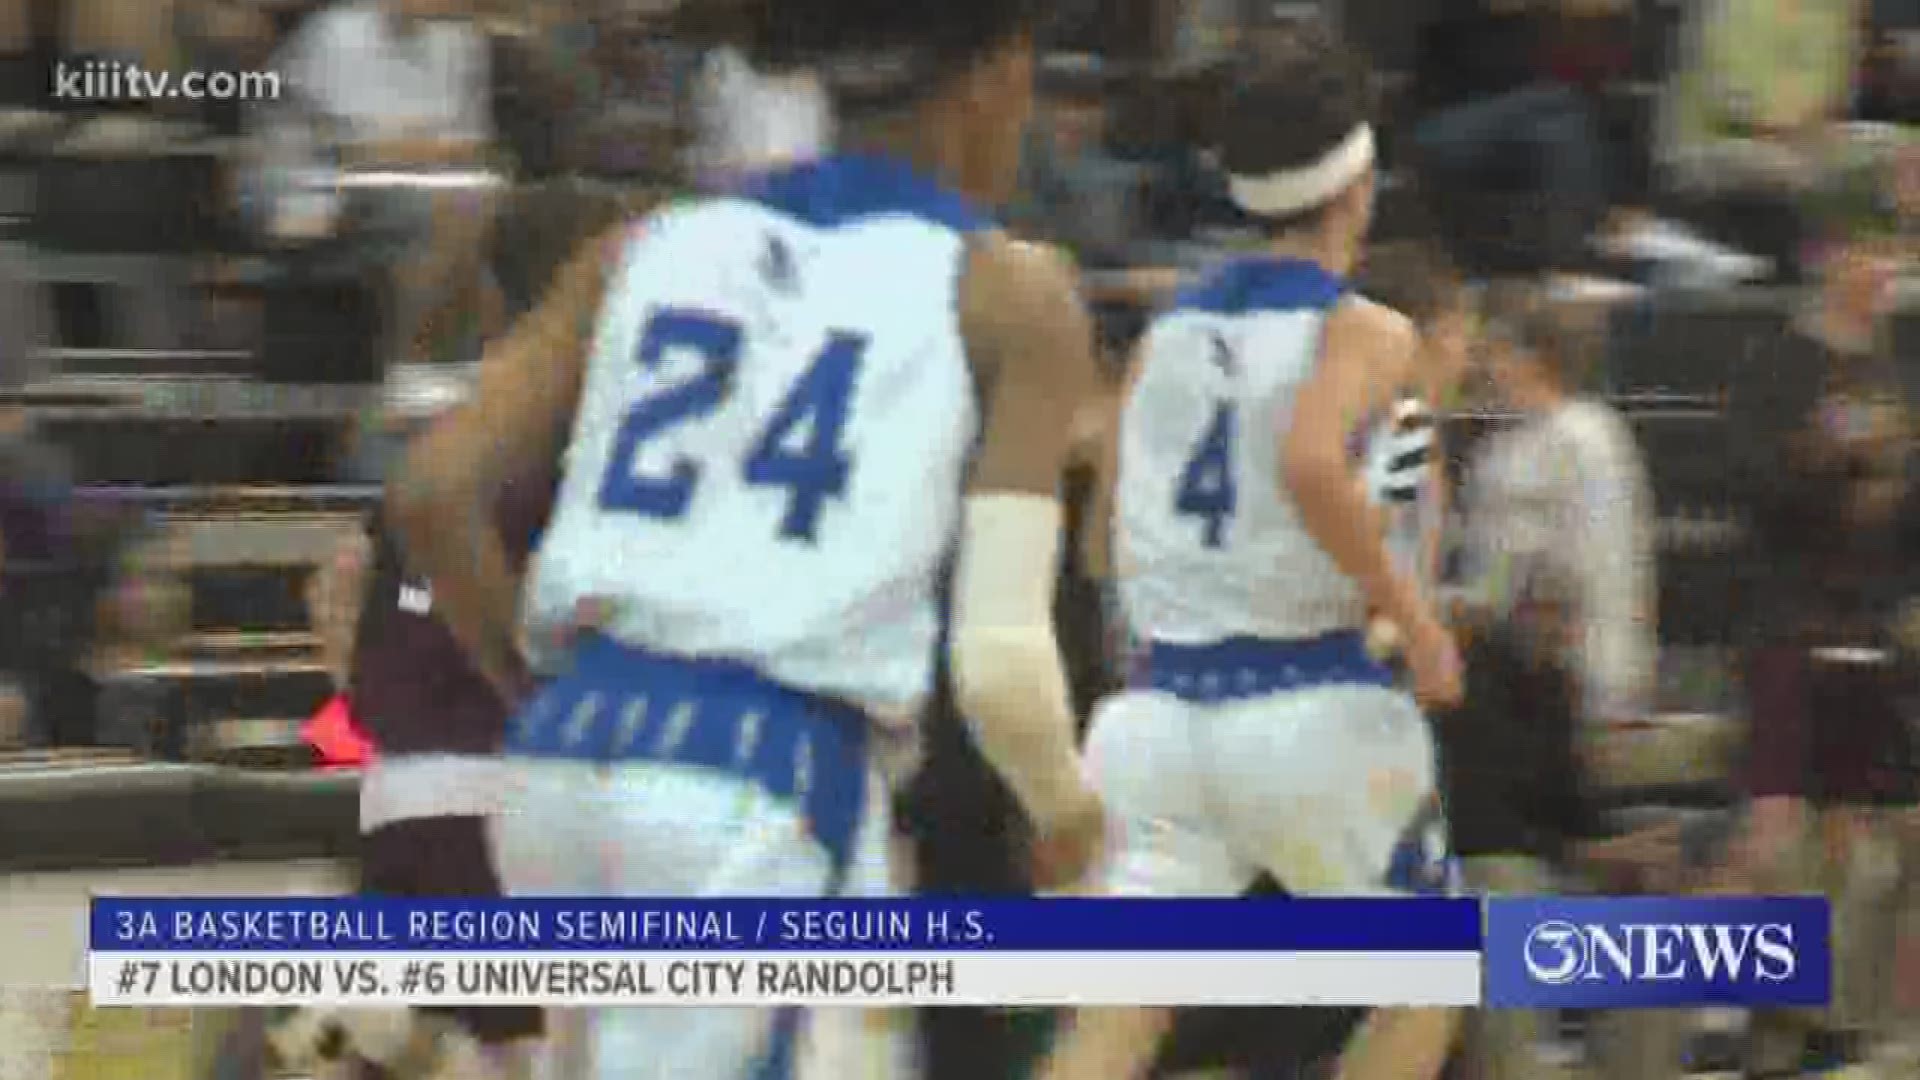 London fell to Universal City Randolph 62-53 while AP goes down to San Antonio Cole 71-49.